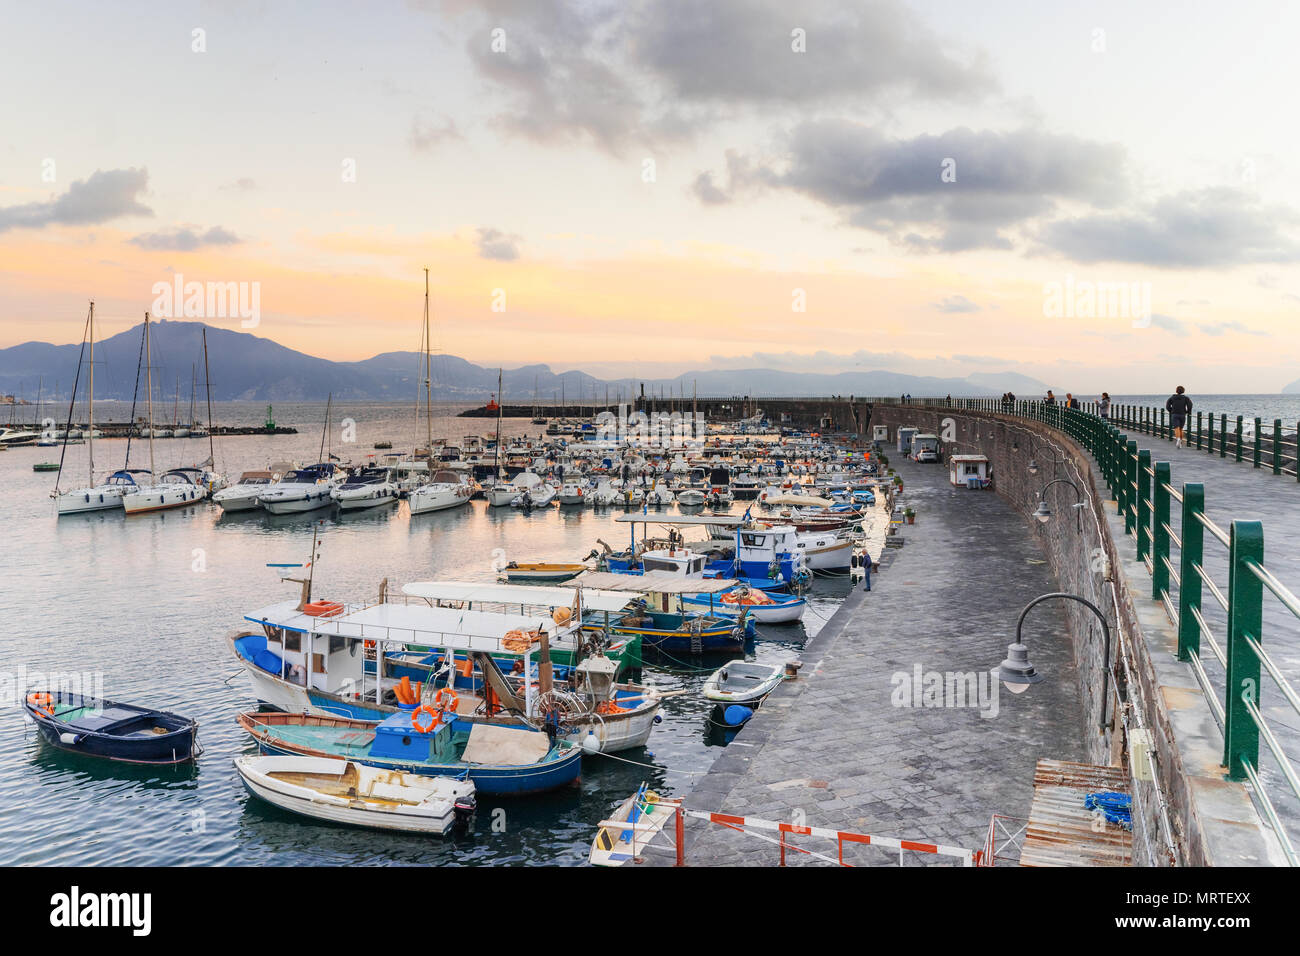 TORRE DEL GRECO, NAPLES, ITALY - NOVEMBER 12, 2017: scenic view of the sea and boats in the port at sunset, on background Sorrento peninsula Stock Photo